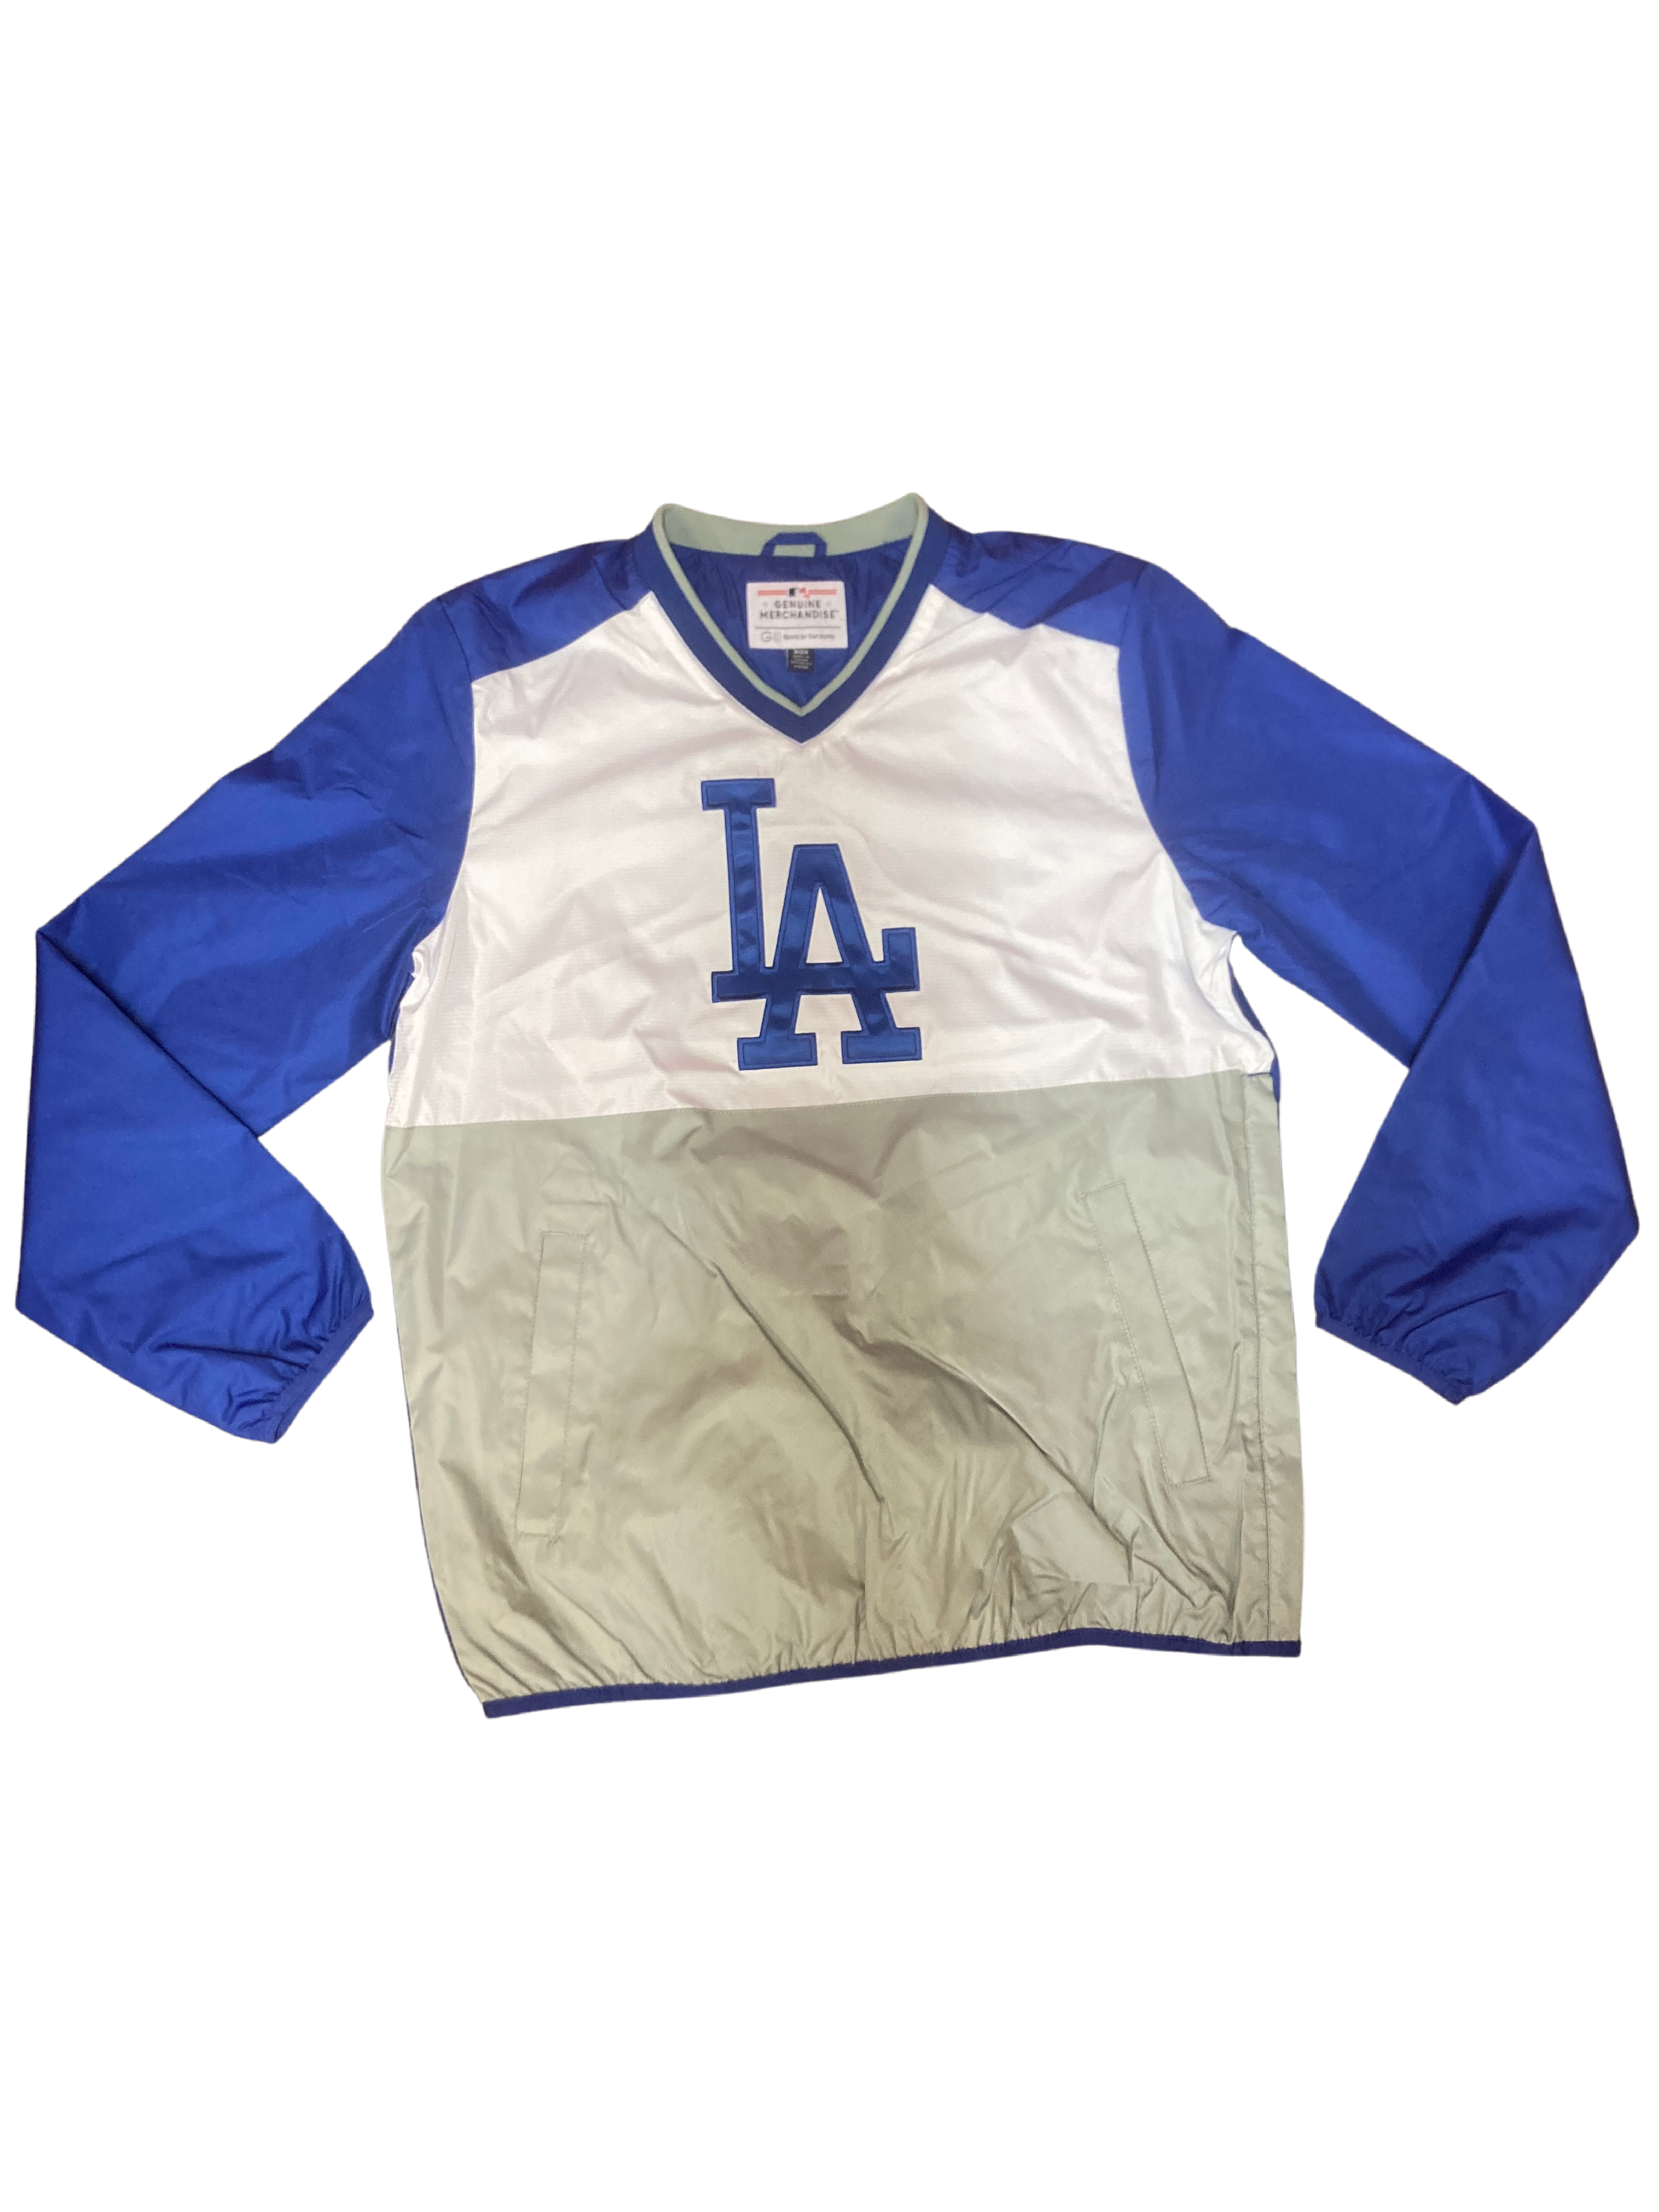 Los Angeles Dodgers 49ERS G-III Home Team V-Neck Pullover - Blue/Grey/White